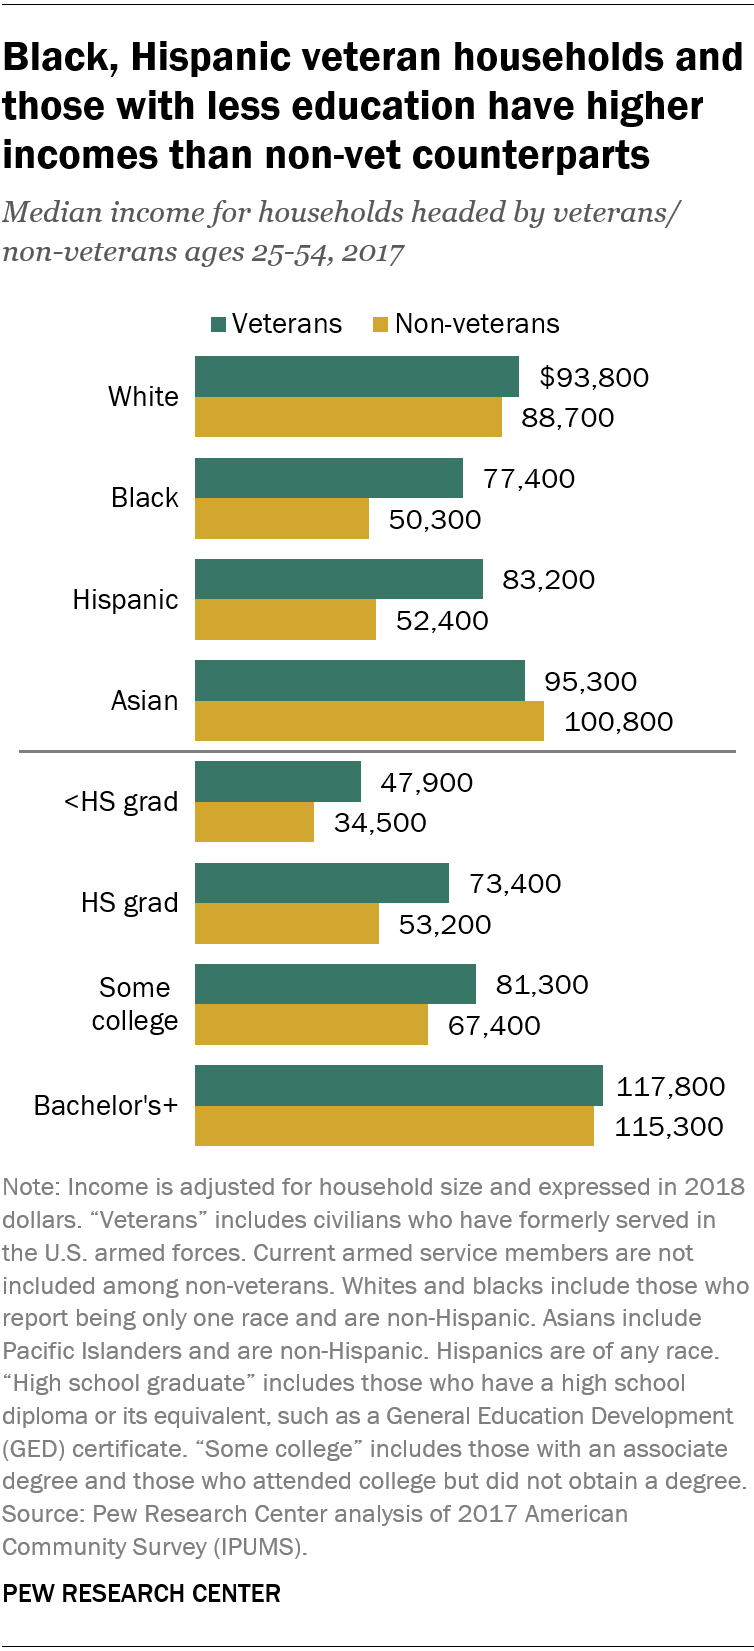 Black, Hispanic veteran households and those with less education have higher incomes than non-vet counterparts